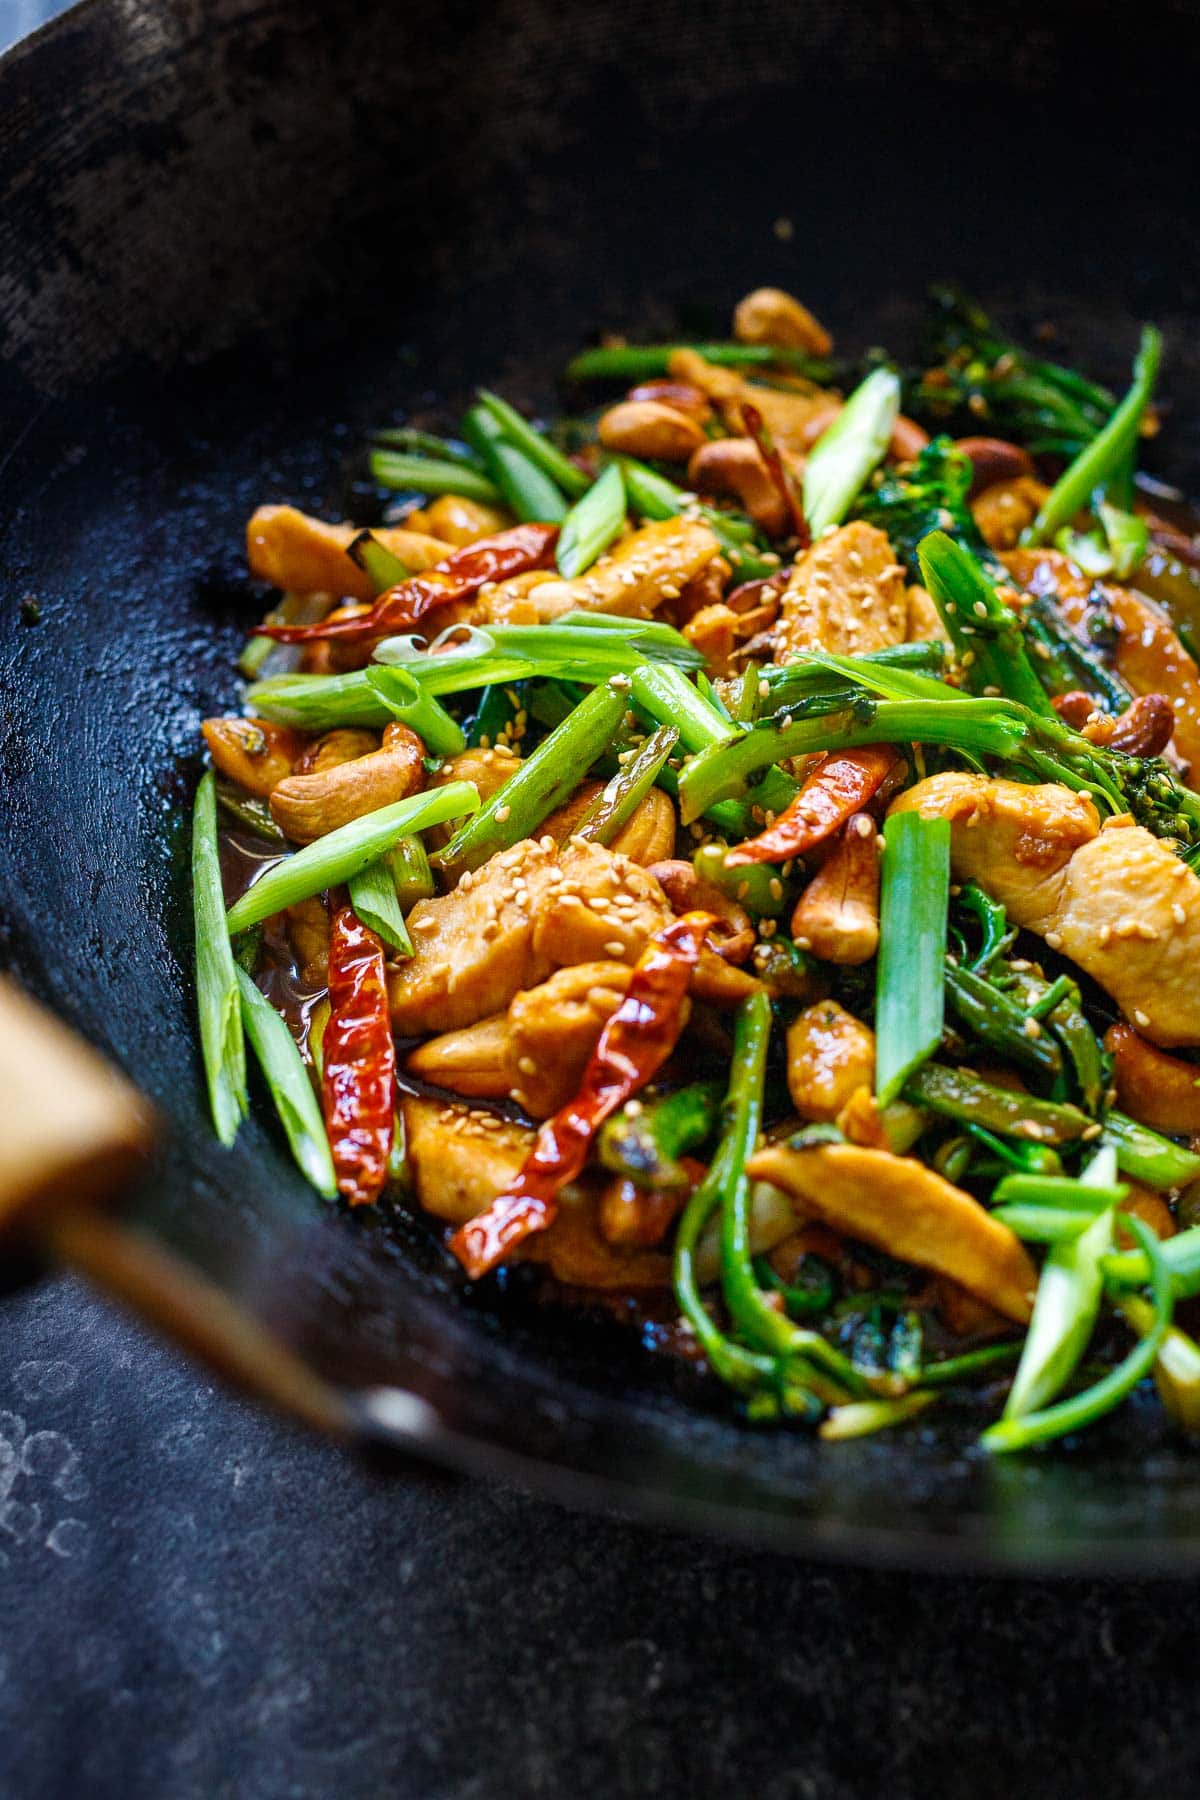 szechuan chicken stir fry in wok with broccolini, scallions, sesame seeds, dried chilies, toasted cashews